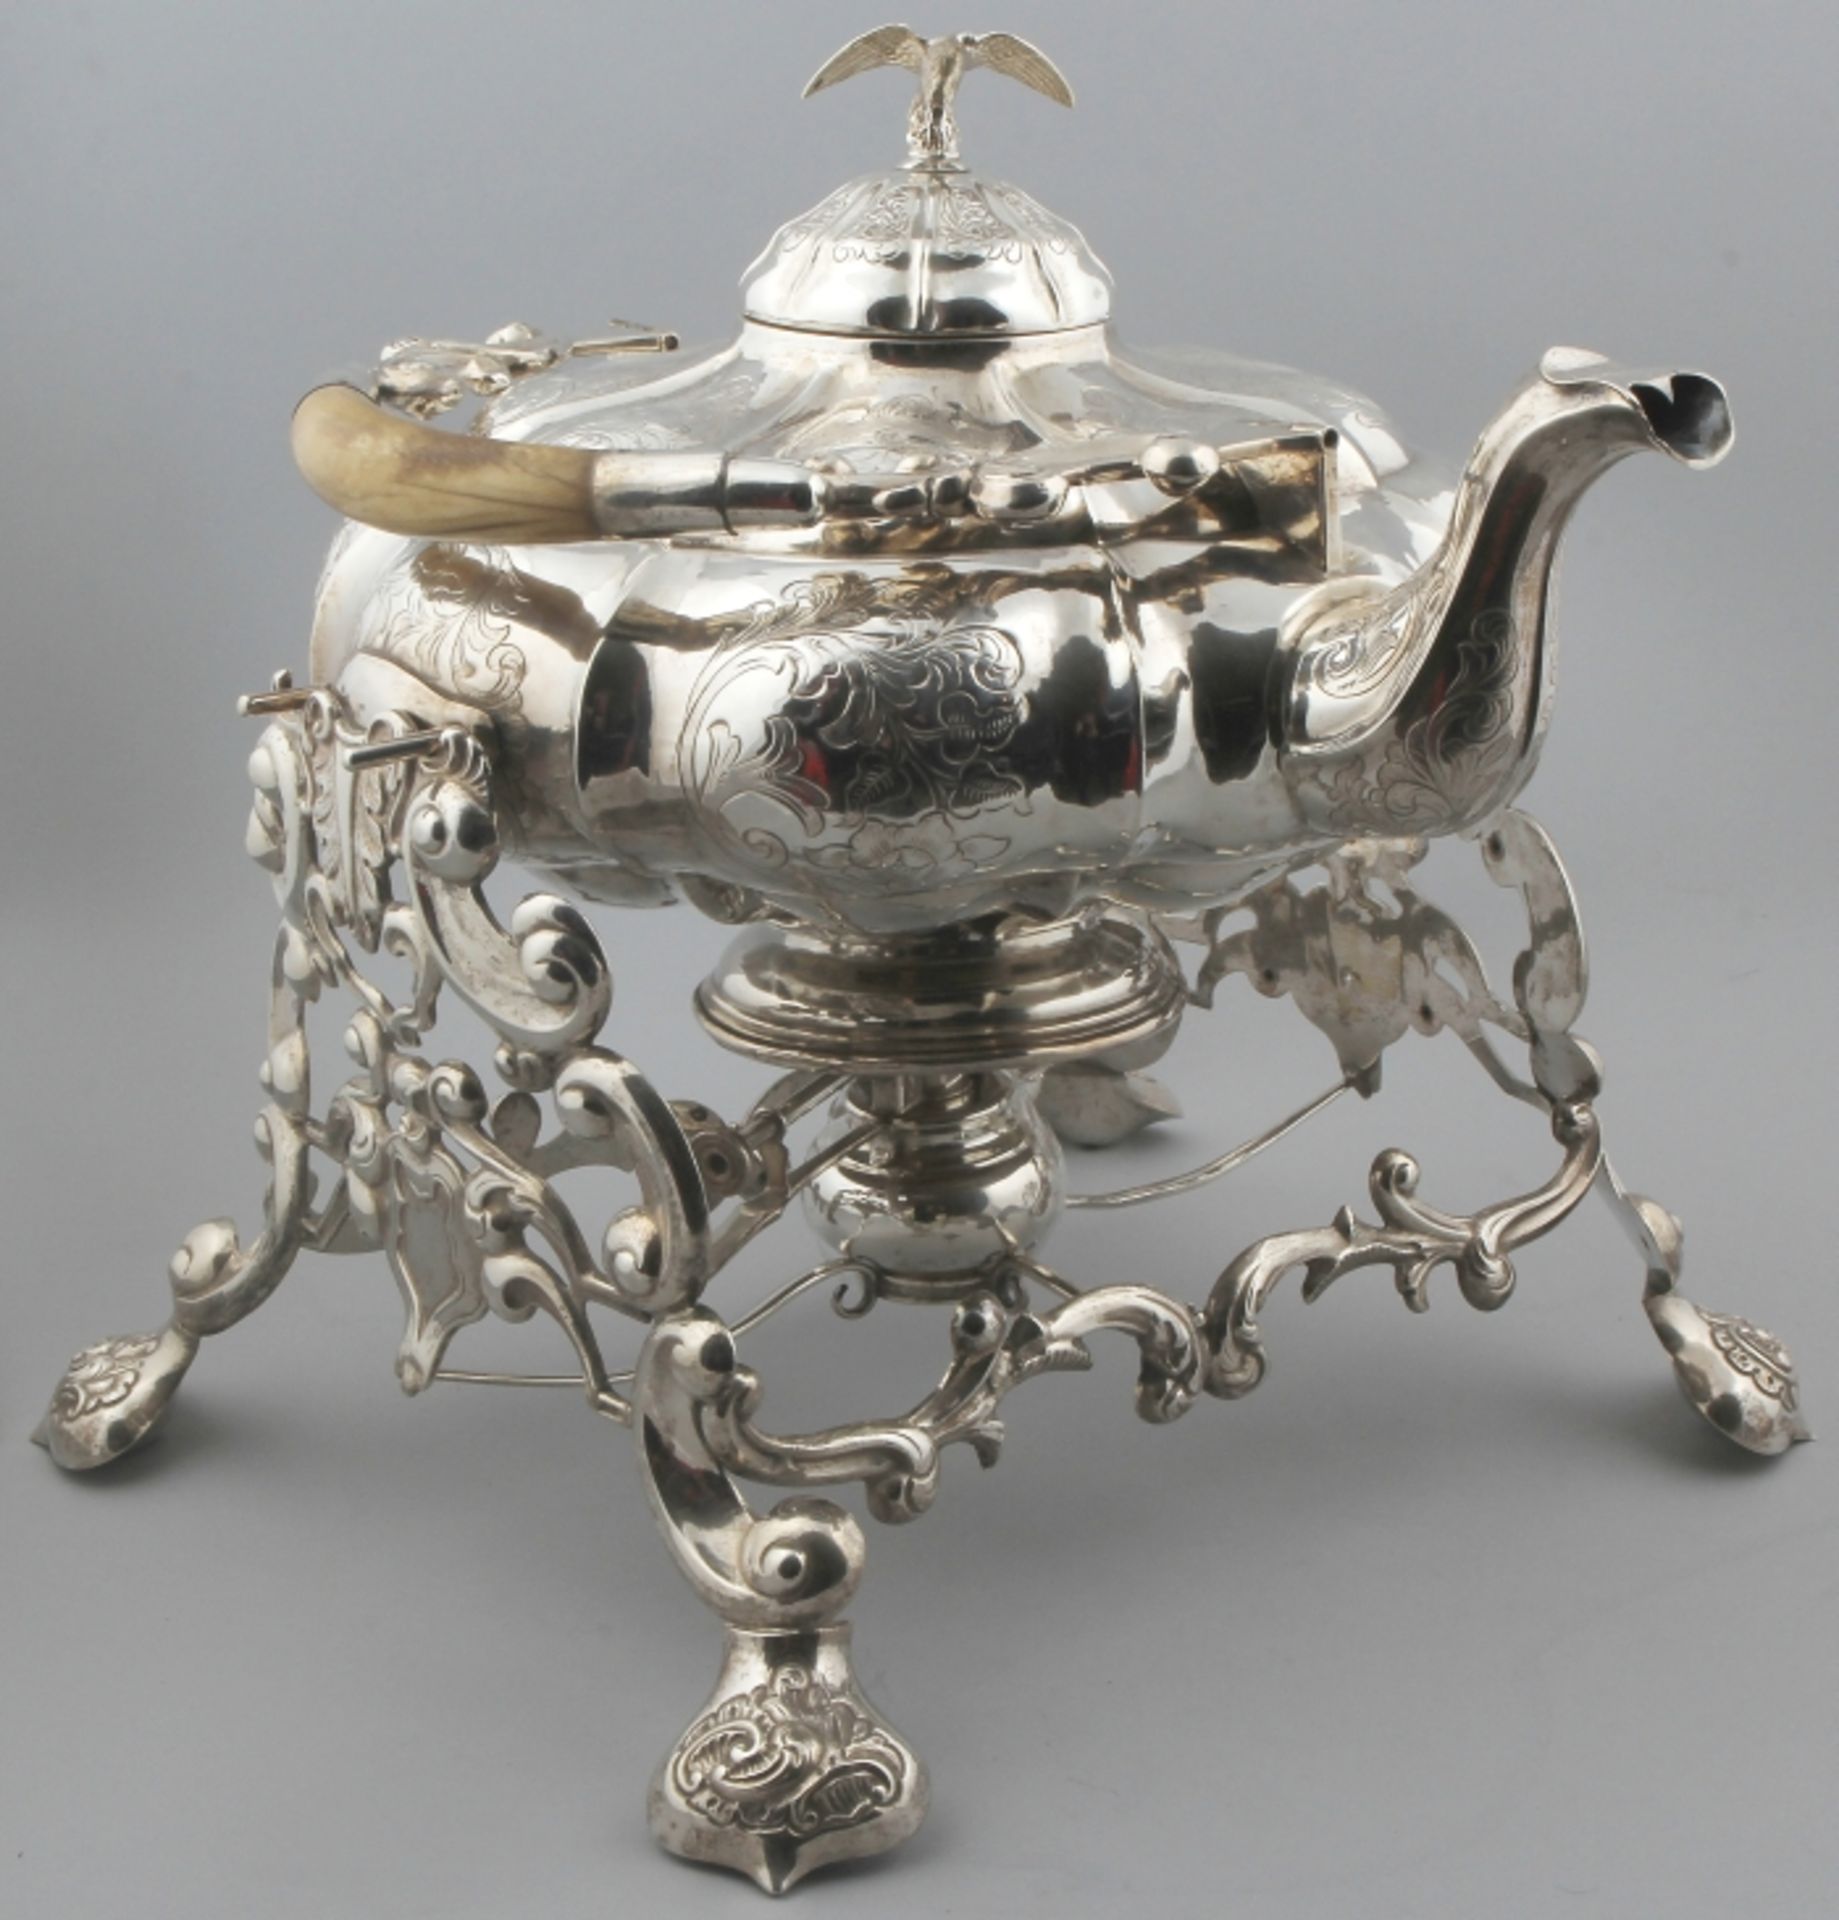 Beautifully hand-chased silver boulloir with legs grip, crowned with eagle and engraved around and